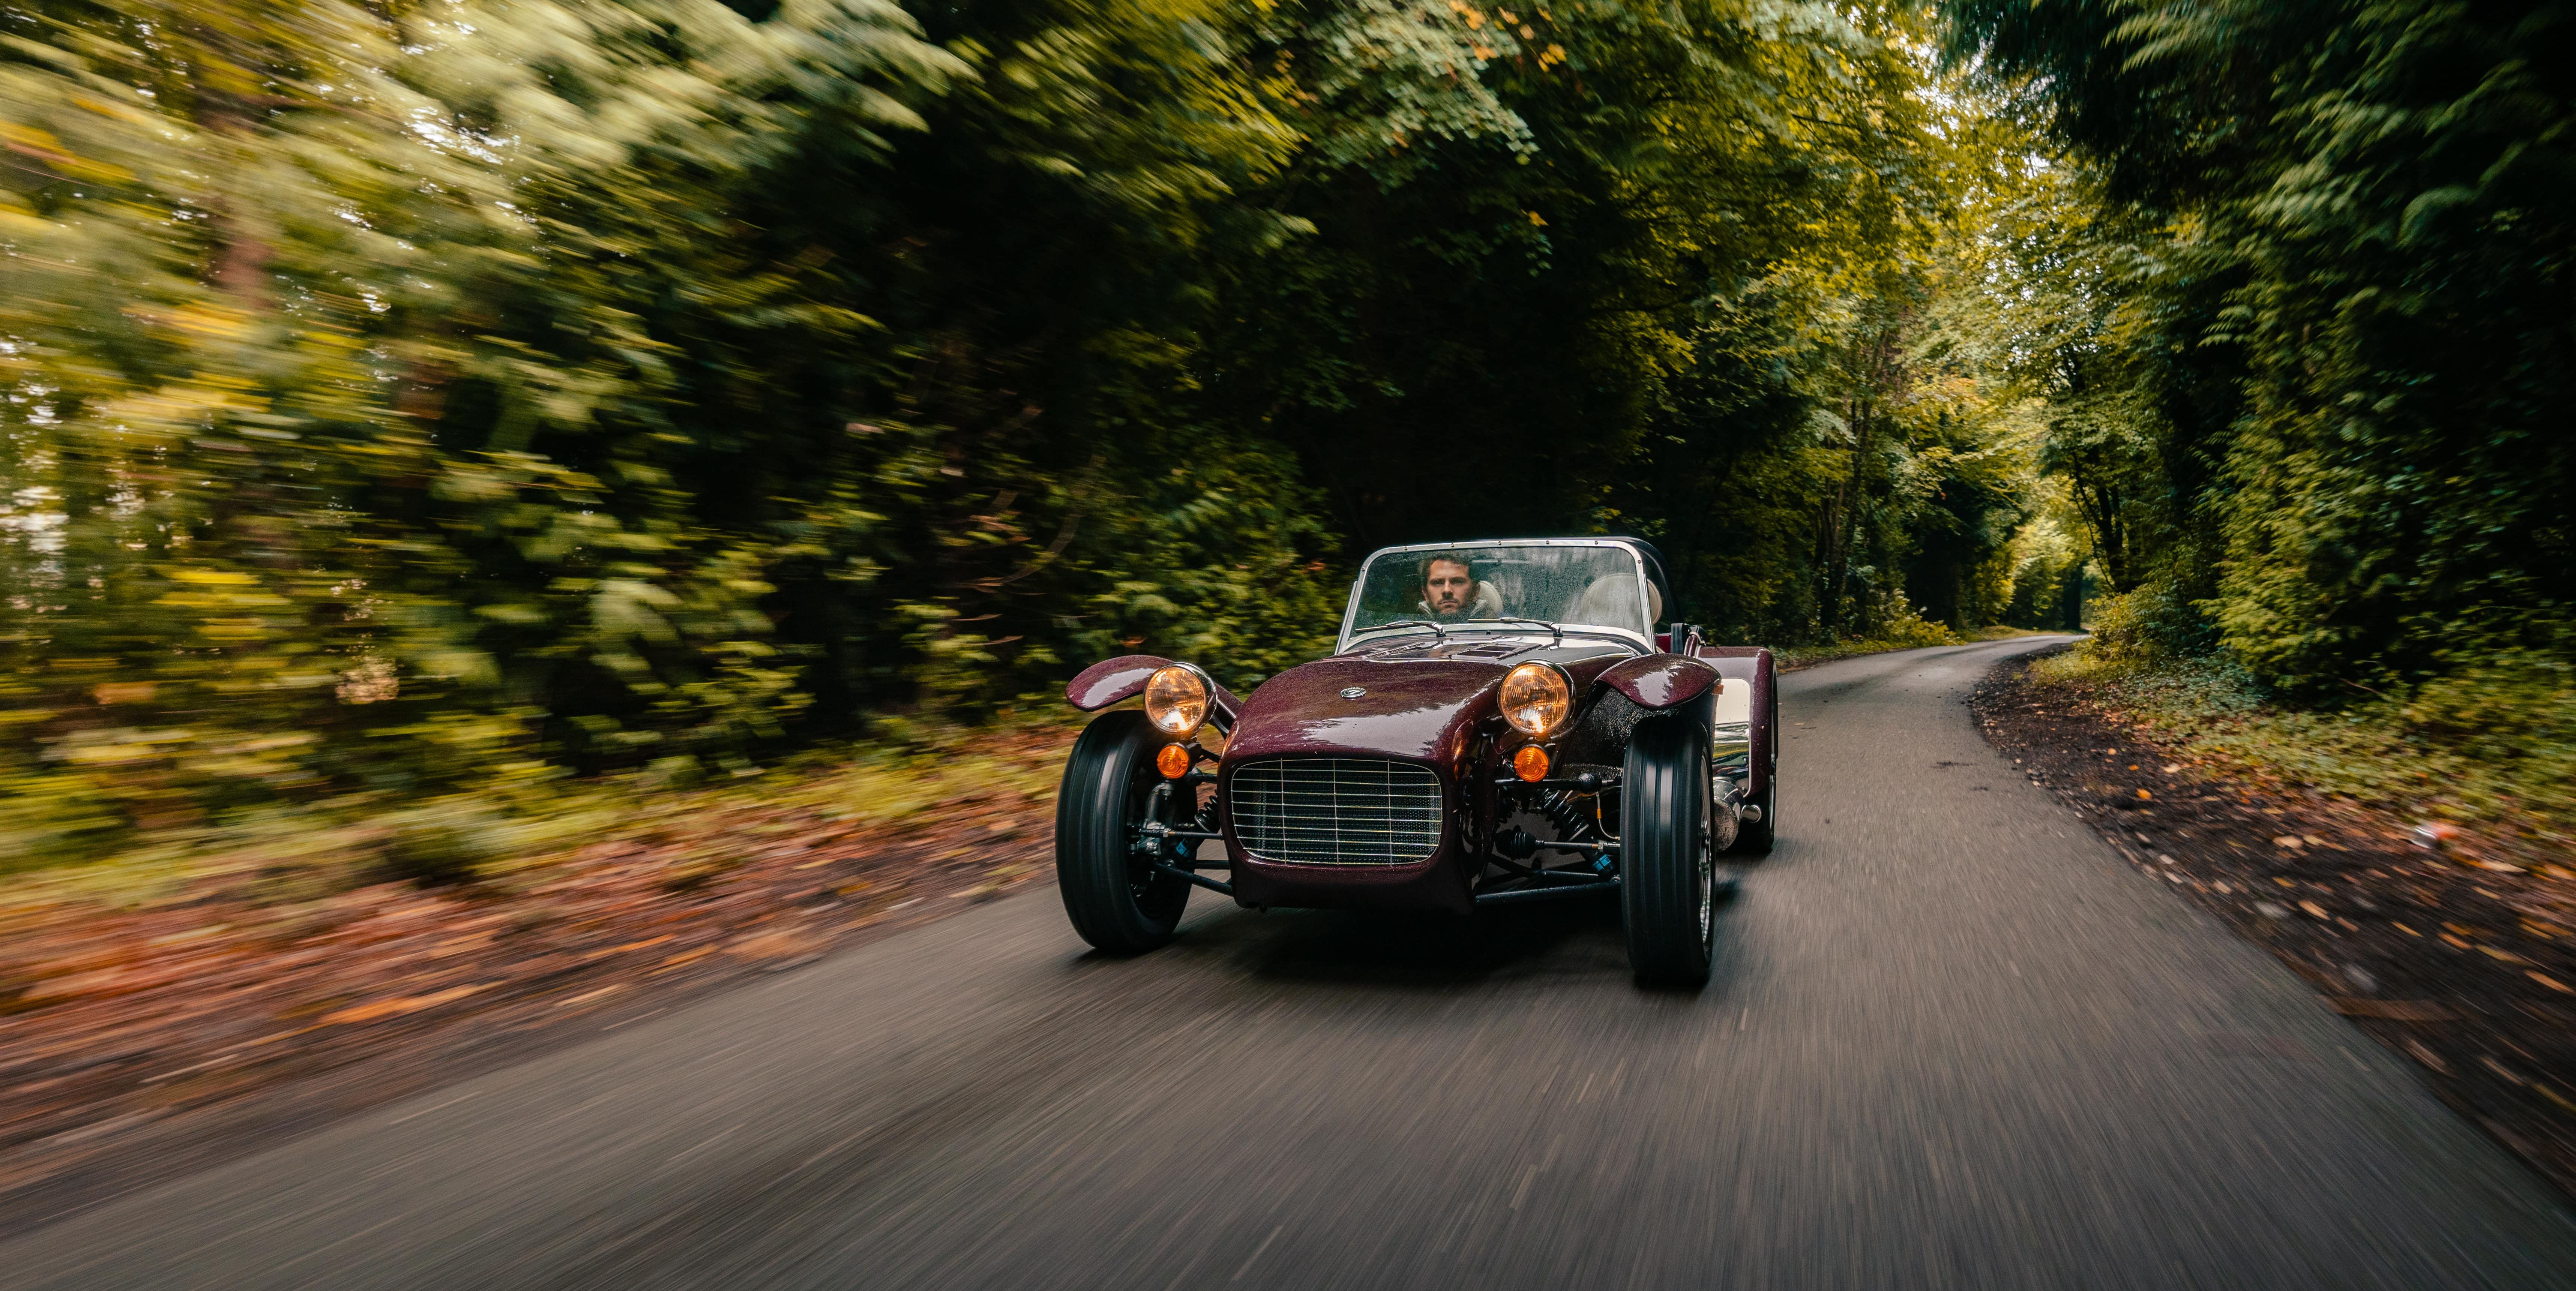 The Caterham Super Seven 600 Is All Sorts of Wonderful